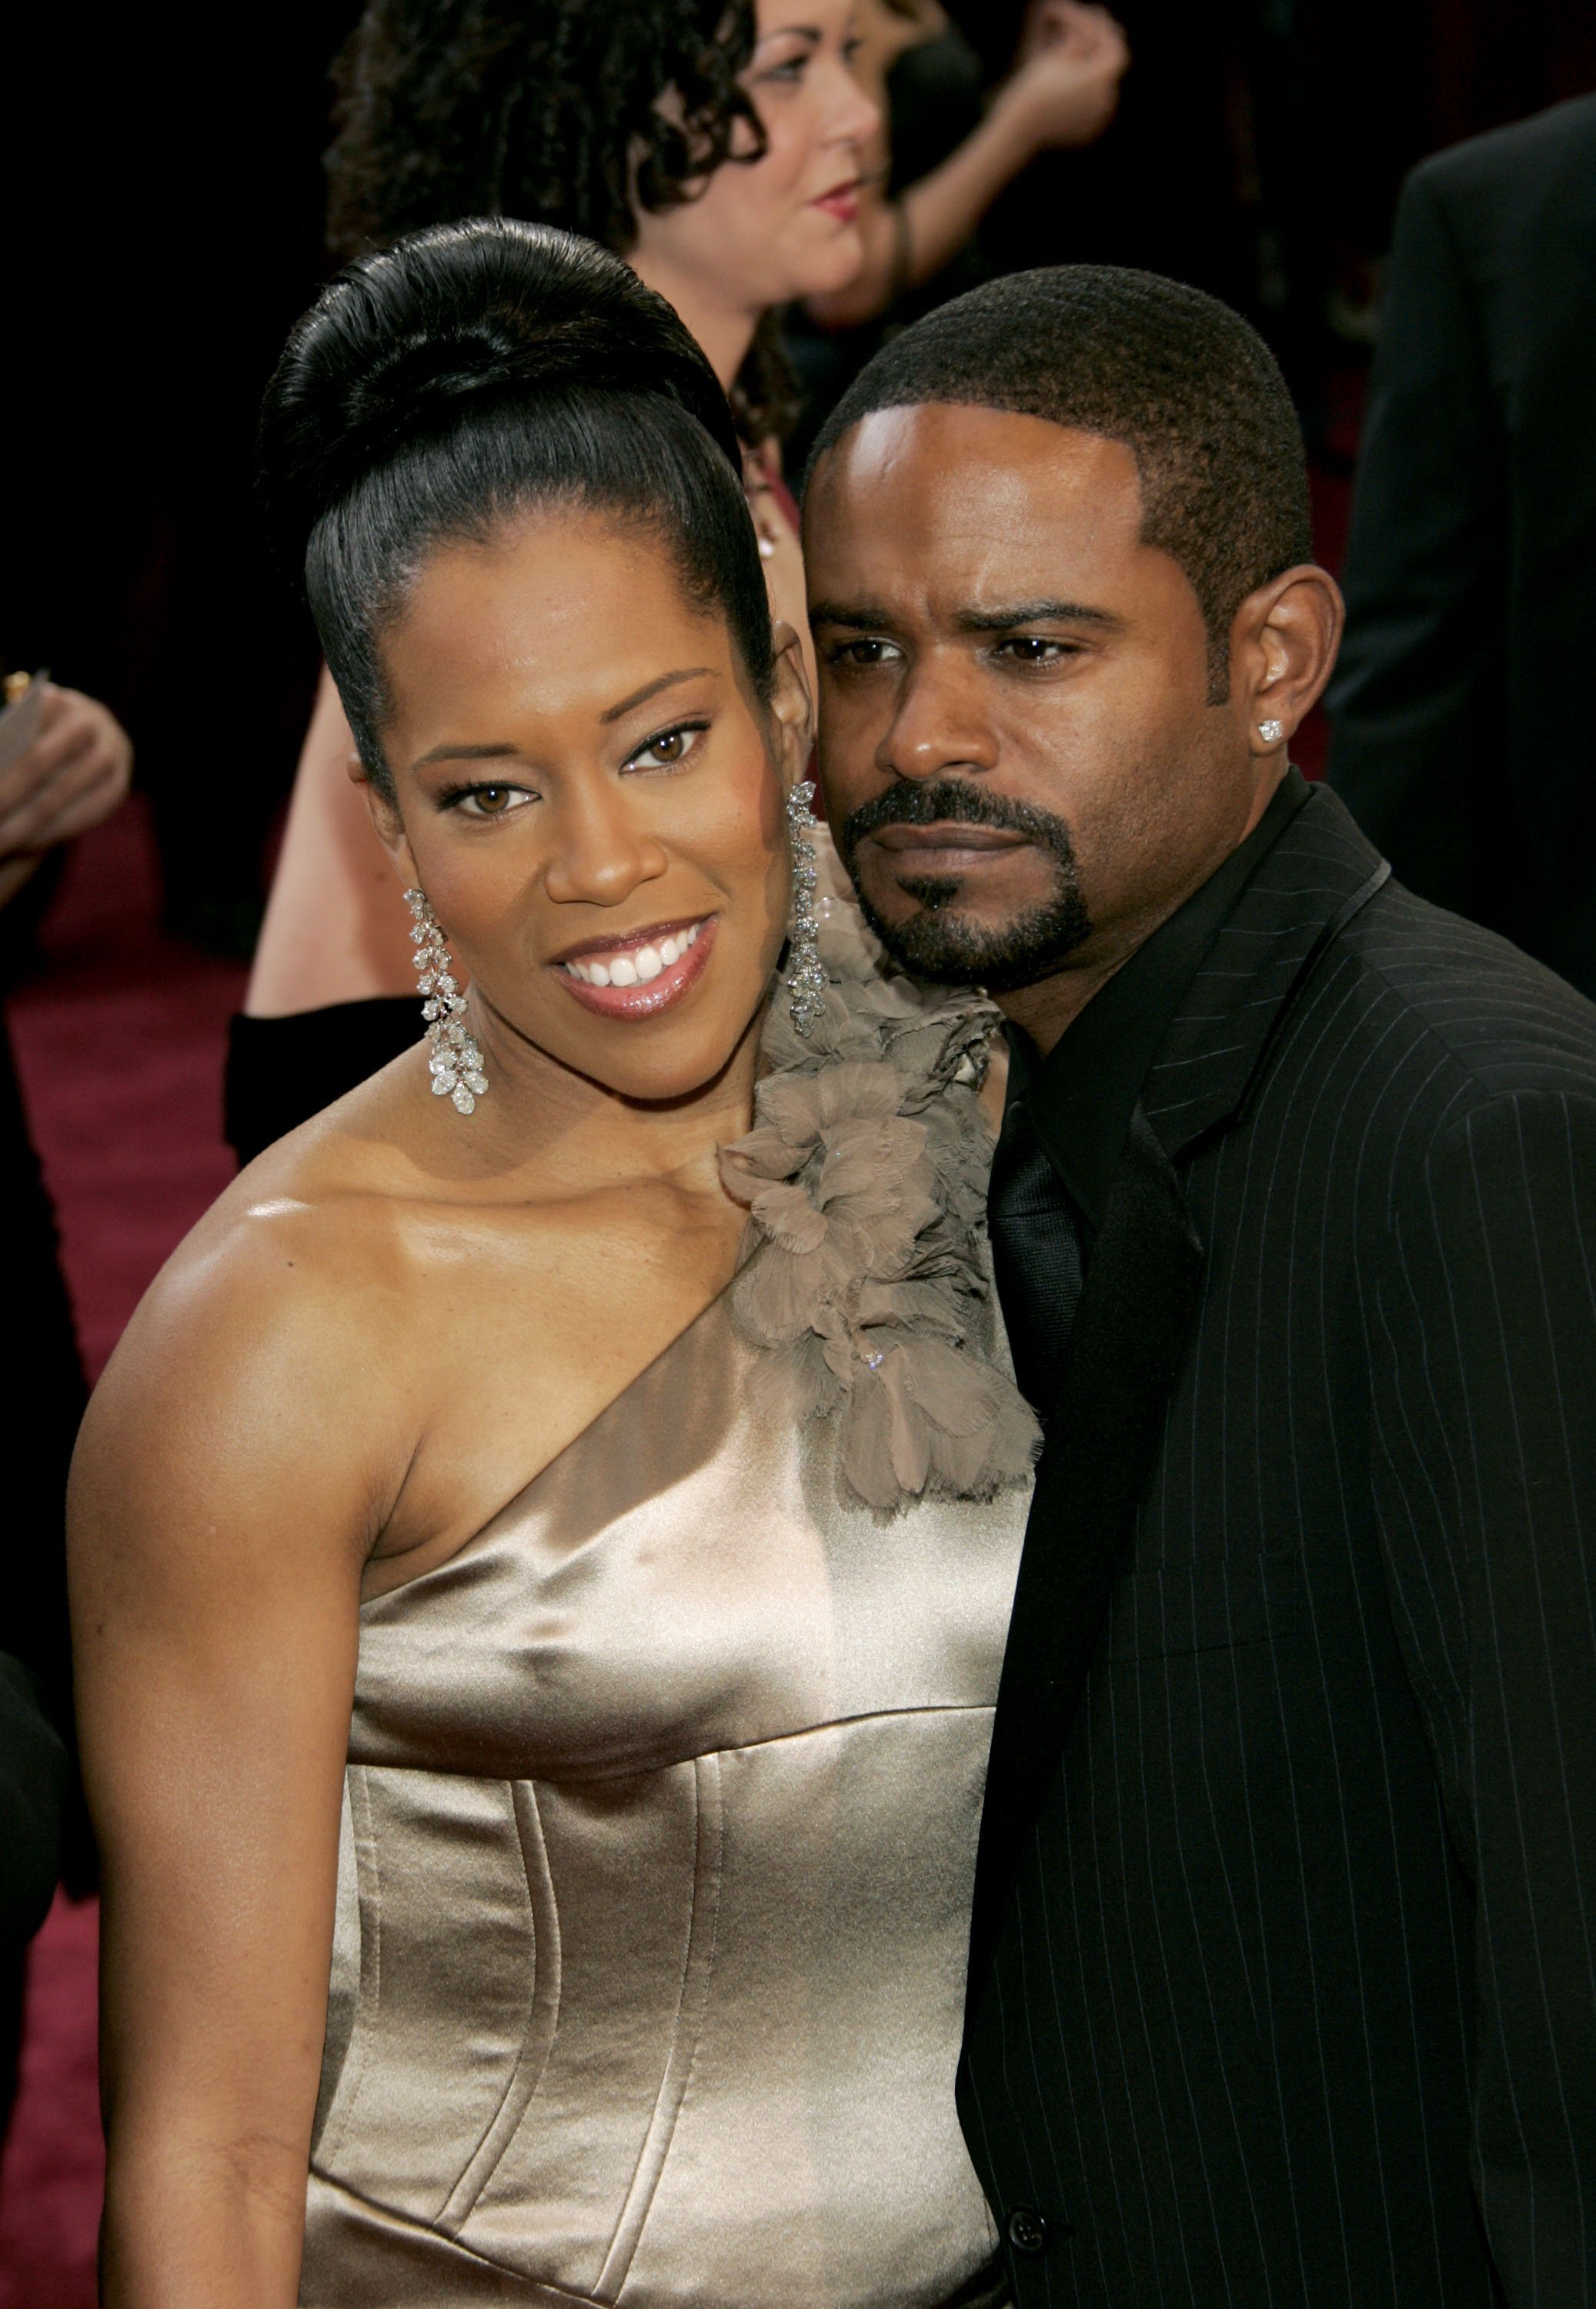 Regina King and Ian Alexander Sr. at the 77th Annual Academy Awards on February 27, 2005 | Source: Getty Images